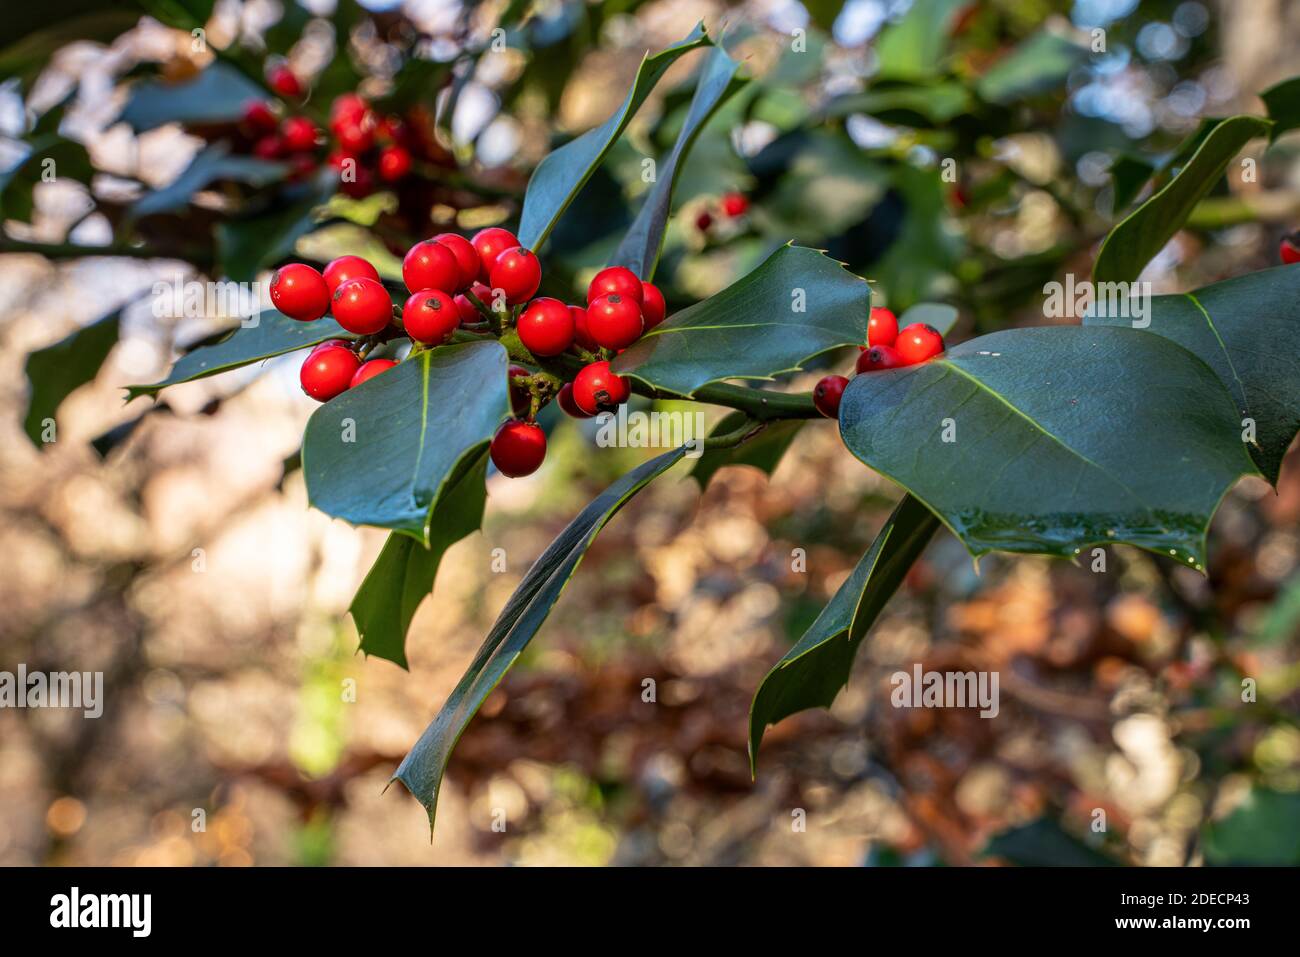 Holly branches with red berries. Christmas plant. Abruzzo, Italy, Europe Stock Photo